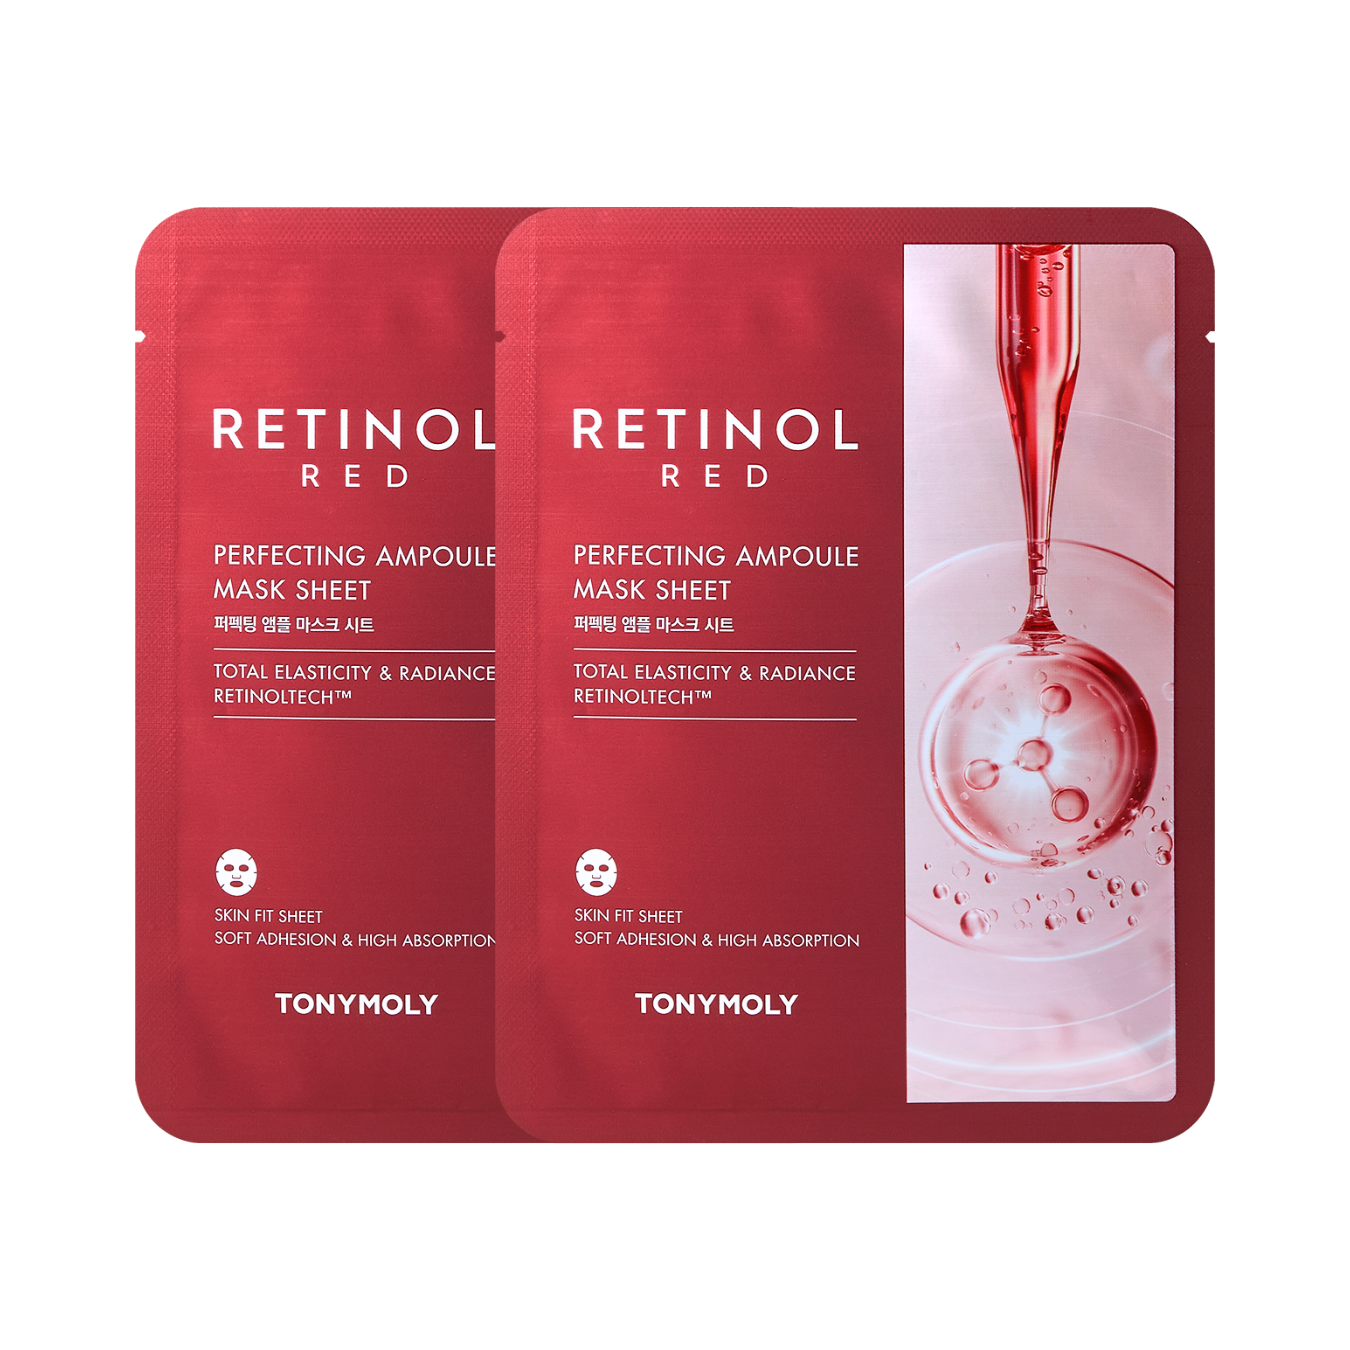 Red Retinol Perfecting Ampoule Mask